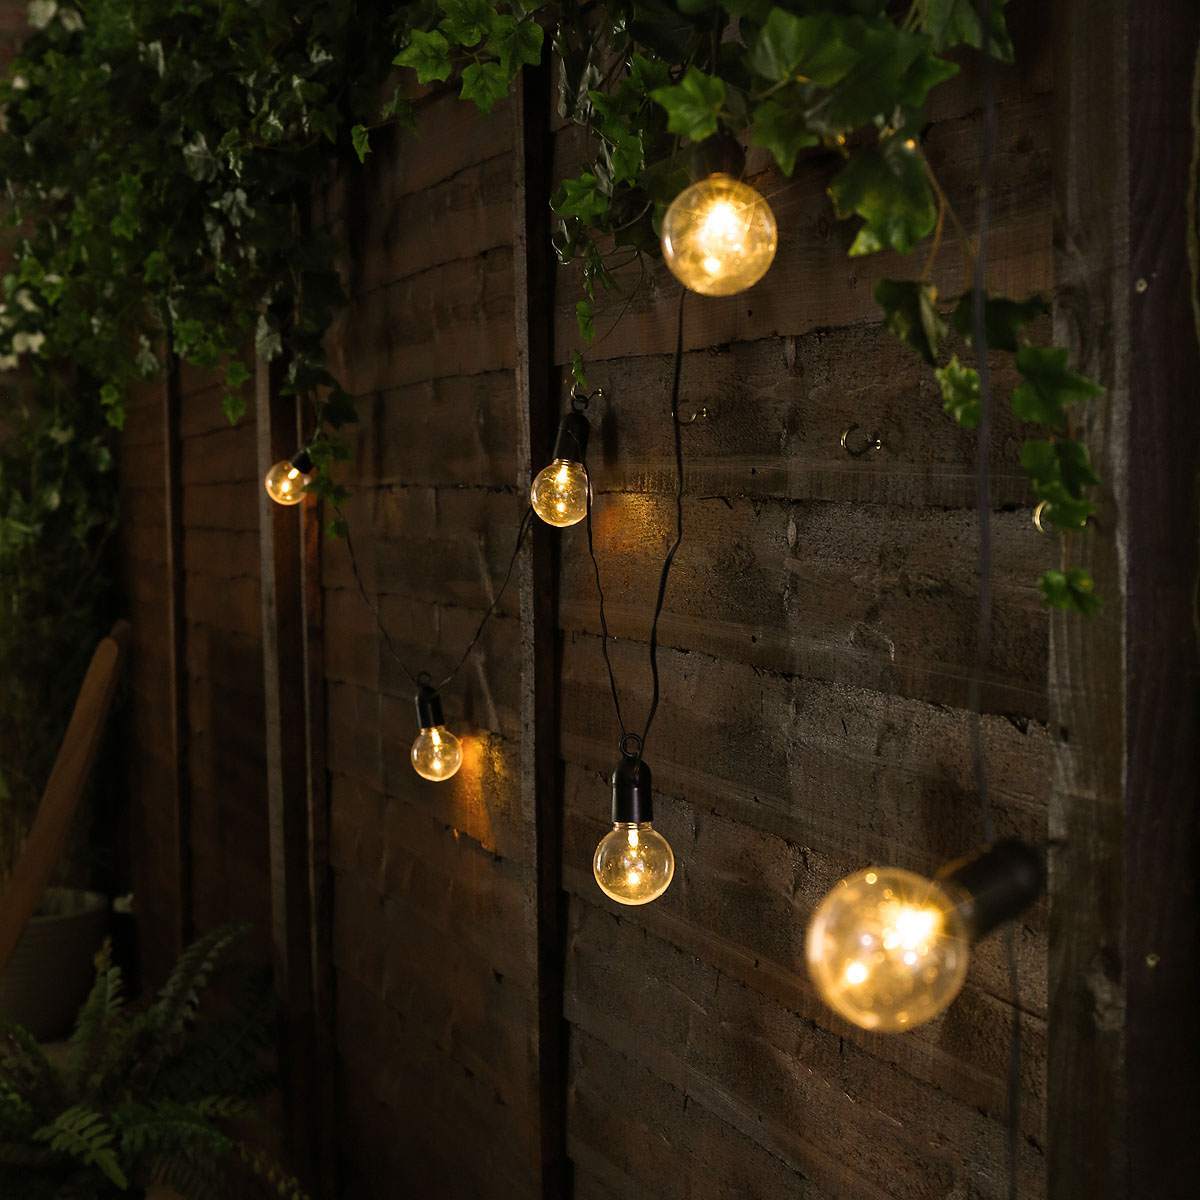 How to install lights on a wooden fence